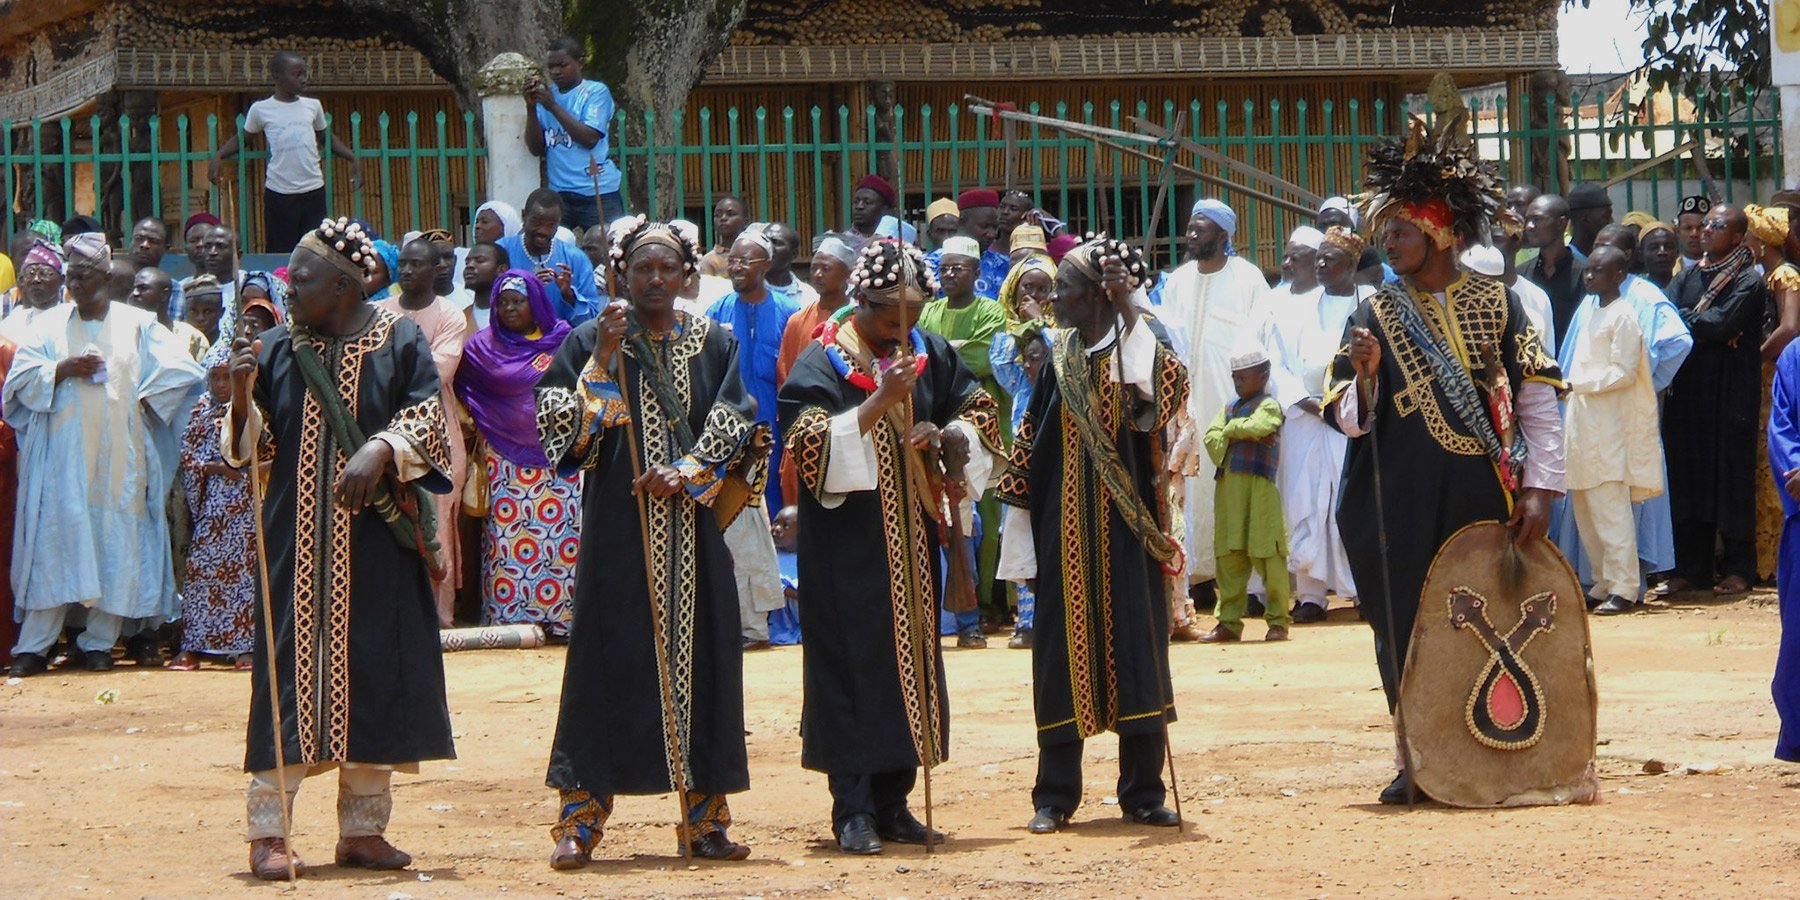 See the unique cultural traditions of the local people in Cameroon whilst on a small group tour with Undiscovered Destinations